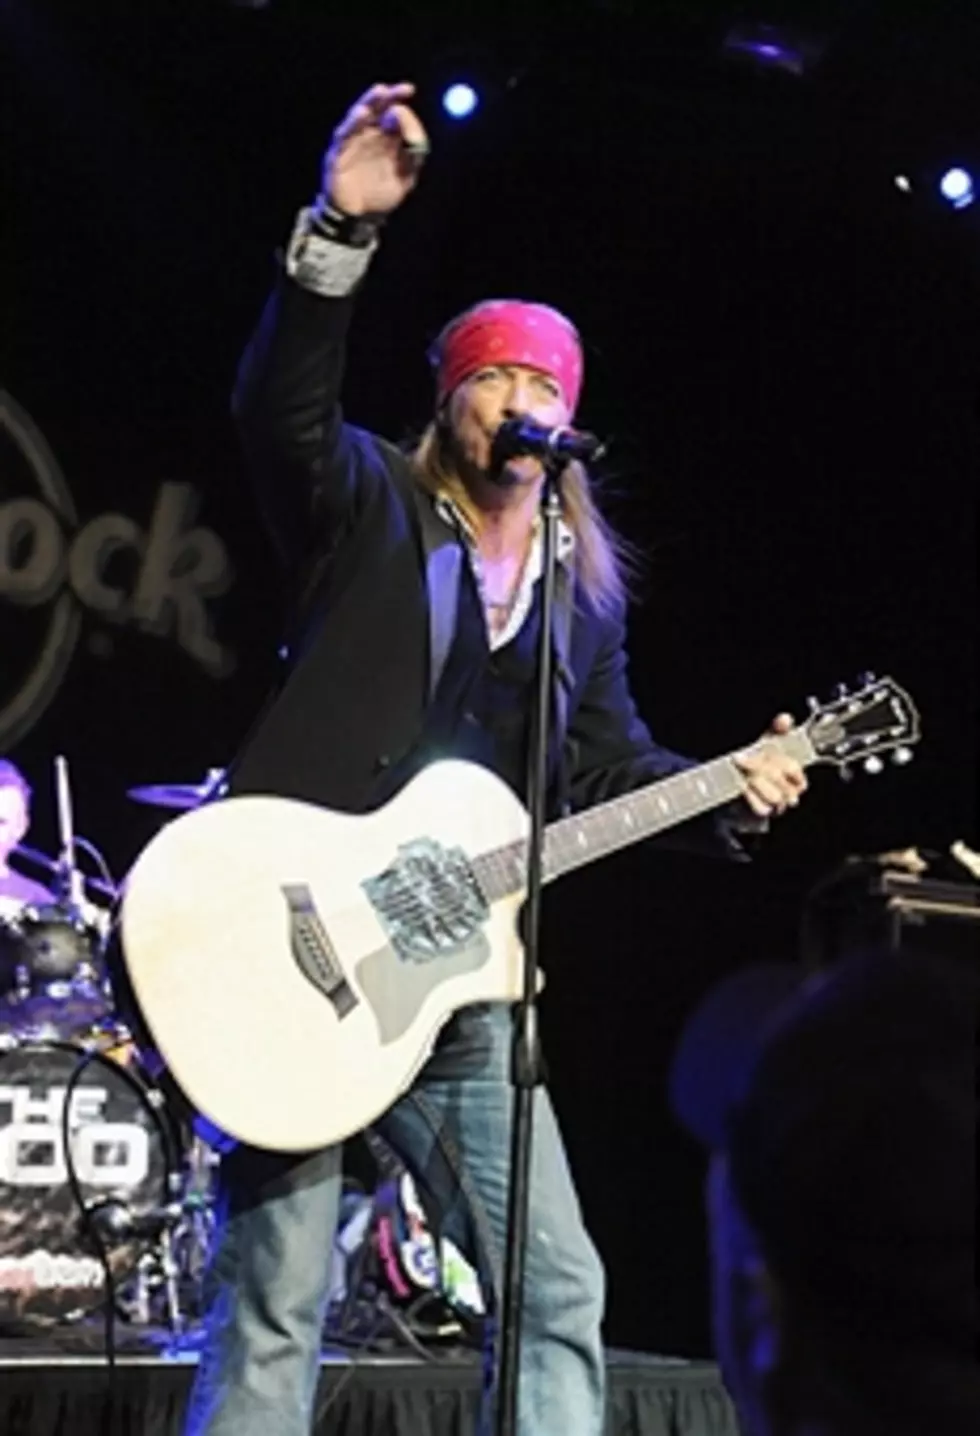 Update on Bret Michaels – Not Performing in Albany Tonight